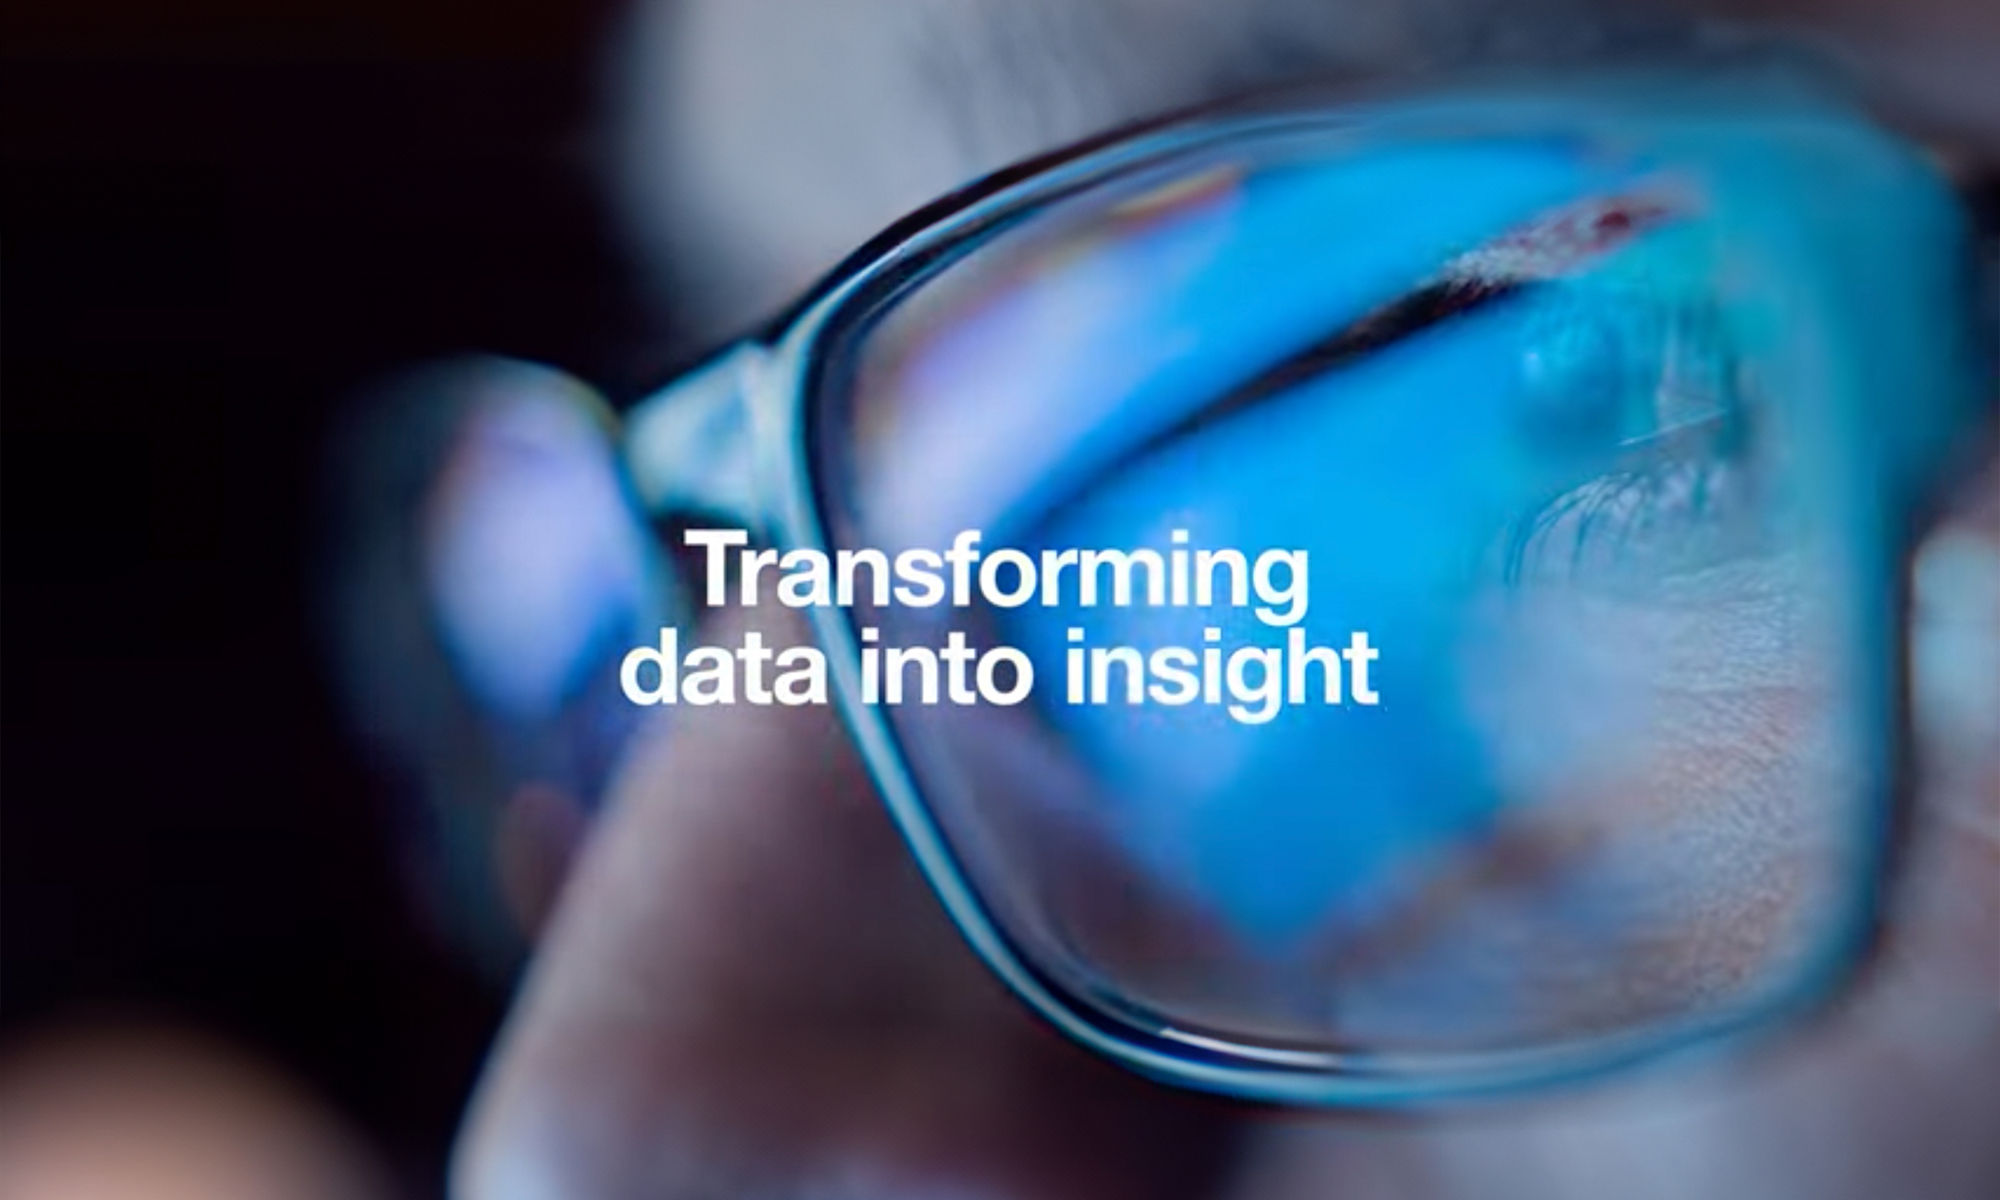 Transforming data into insight - man with blue lit glasses